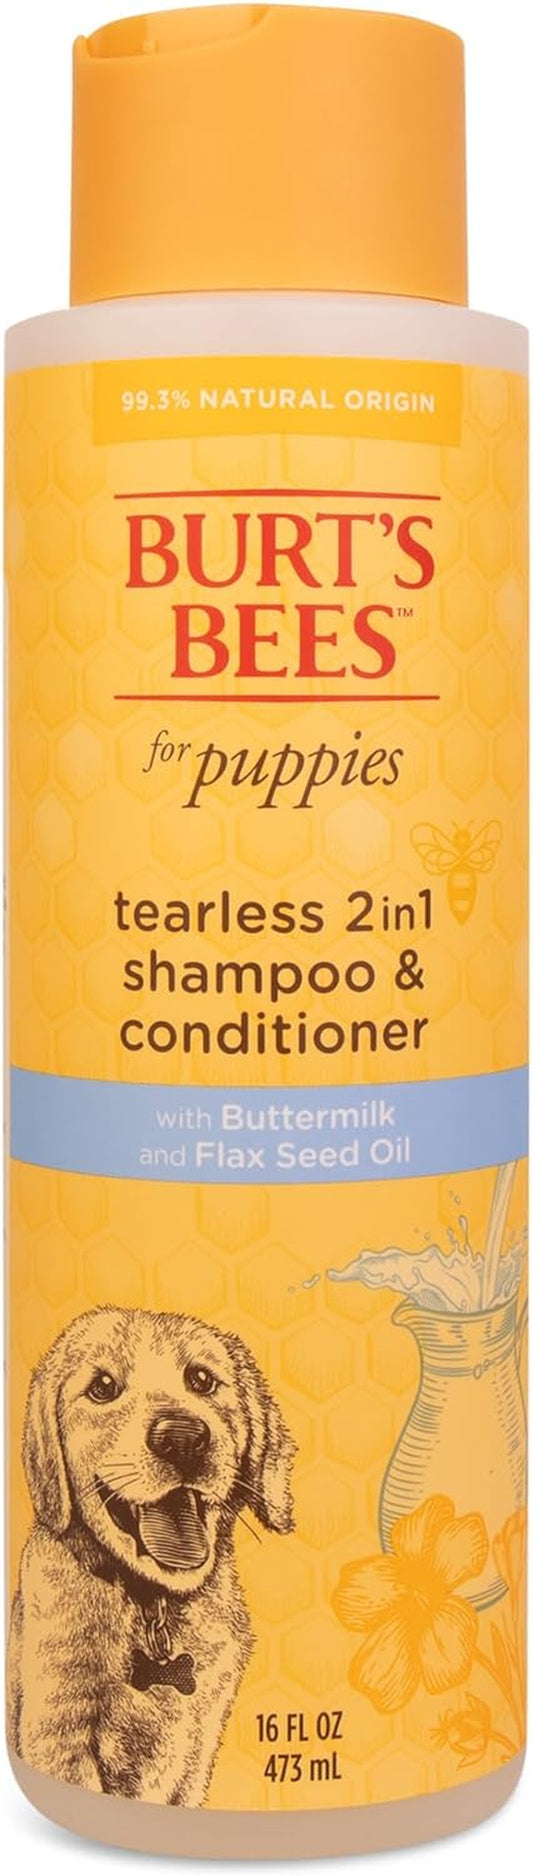 Puppies Natural Tearless 2 in 1 Shampoo and Conditioner - Made with Buttermilk and Flax Seed Oil - Best Tearless Puppy Shampoo for Gentle Skin and Coat - Made in USA, 16 Oz